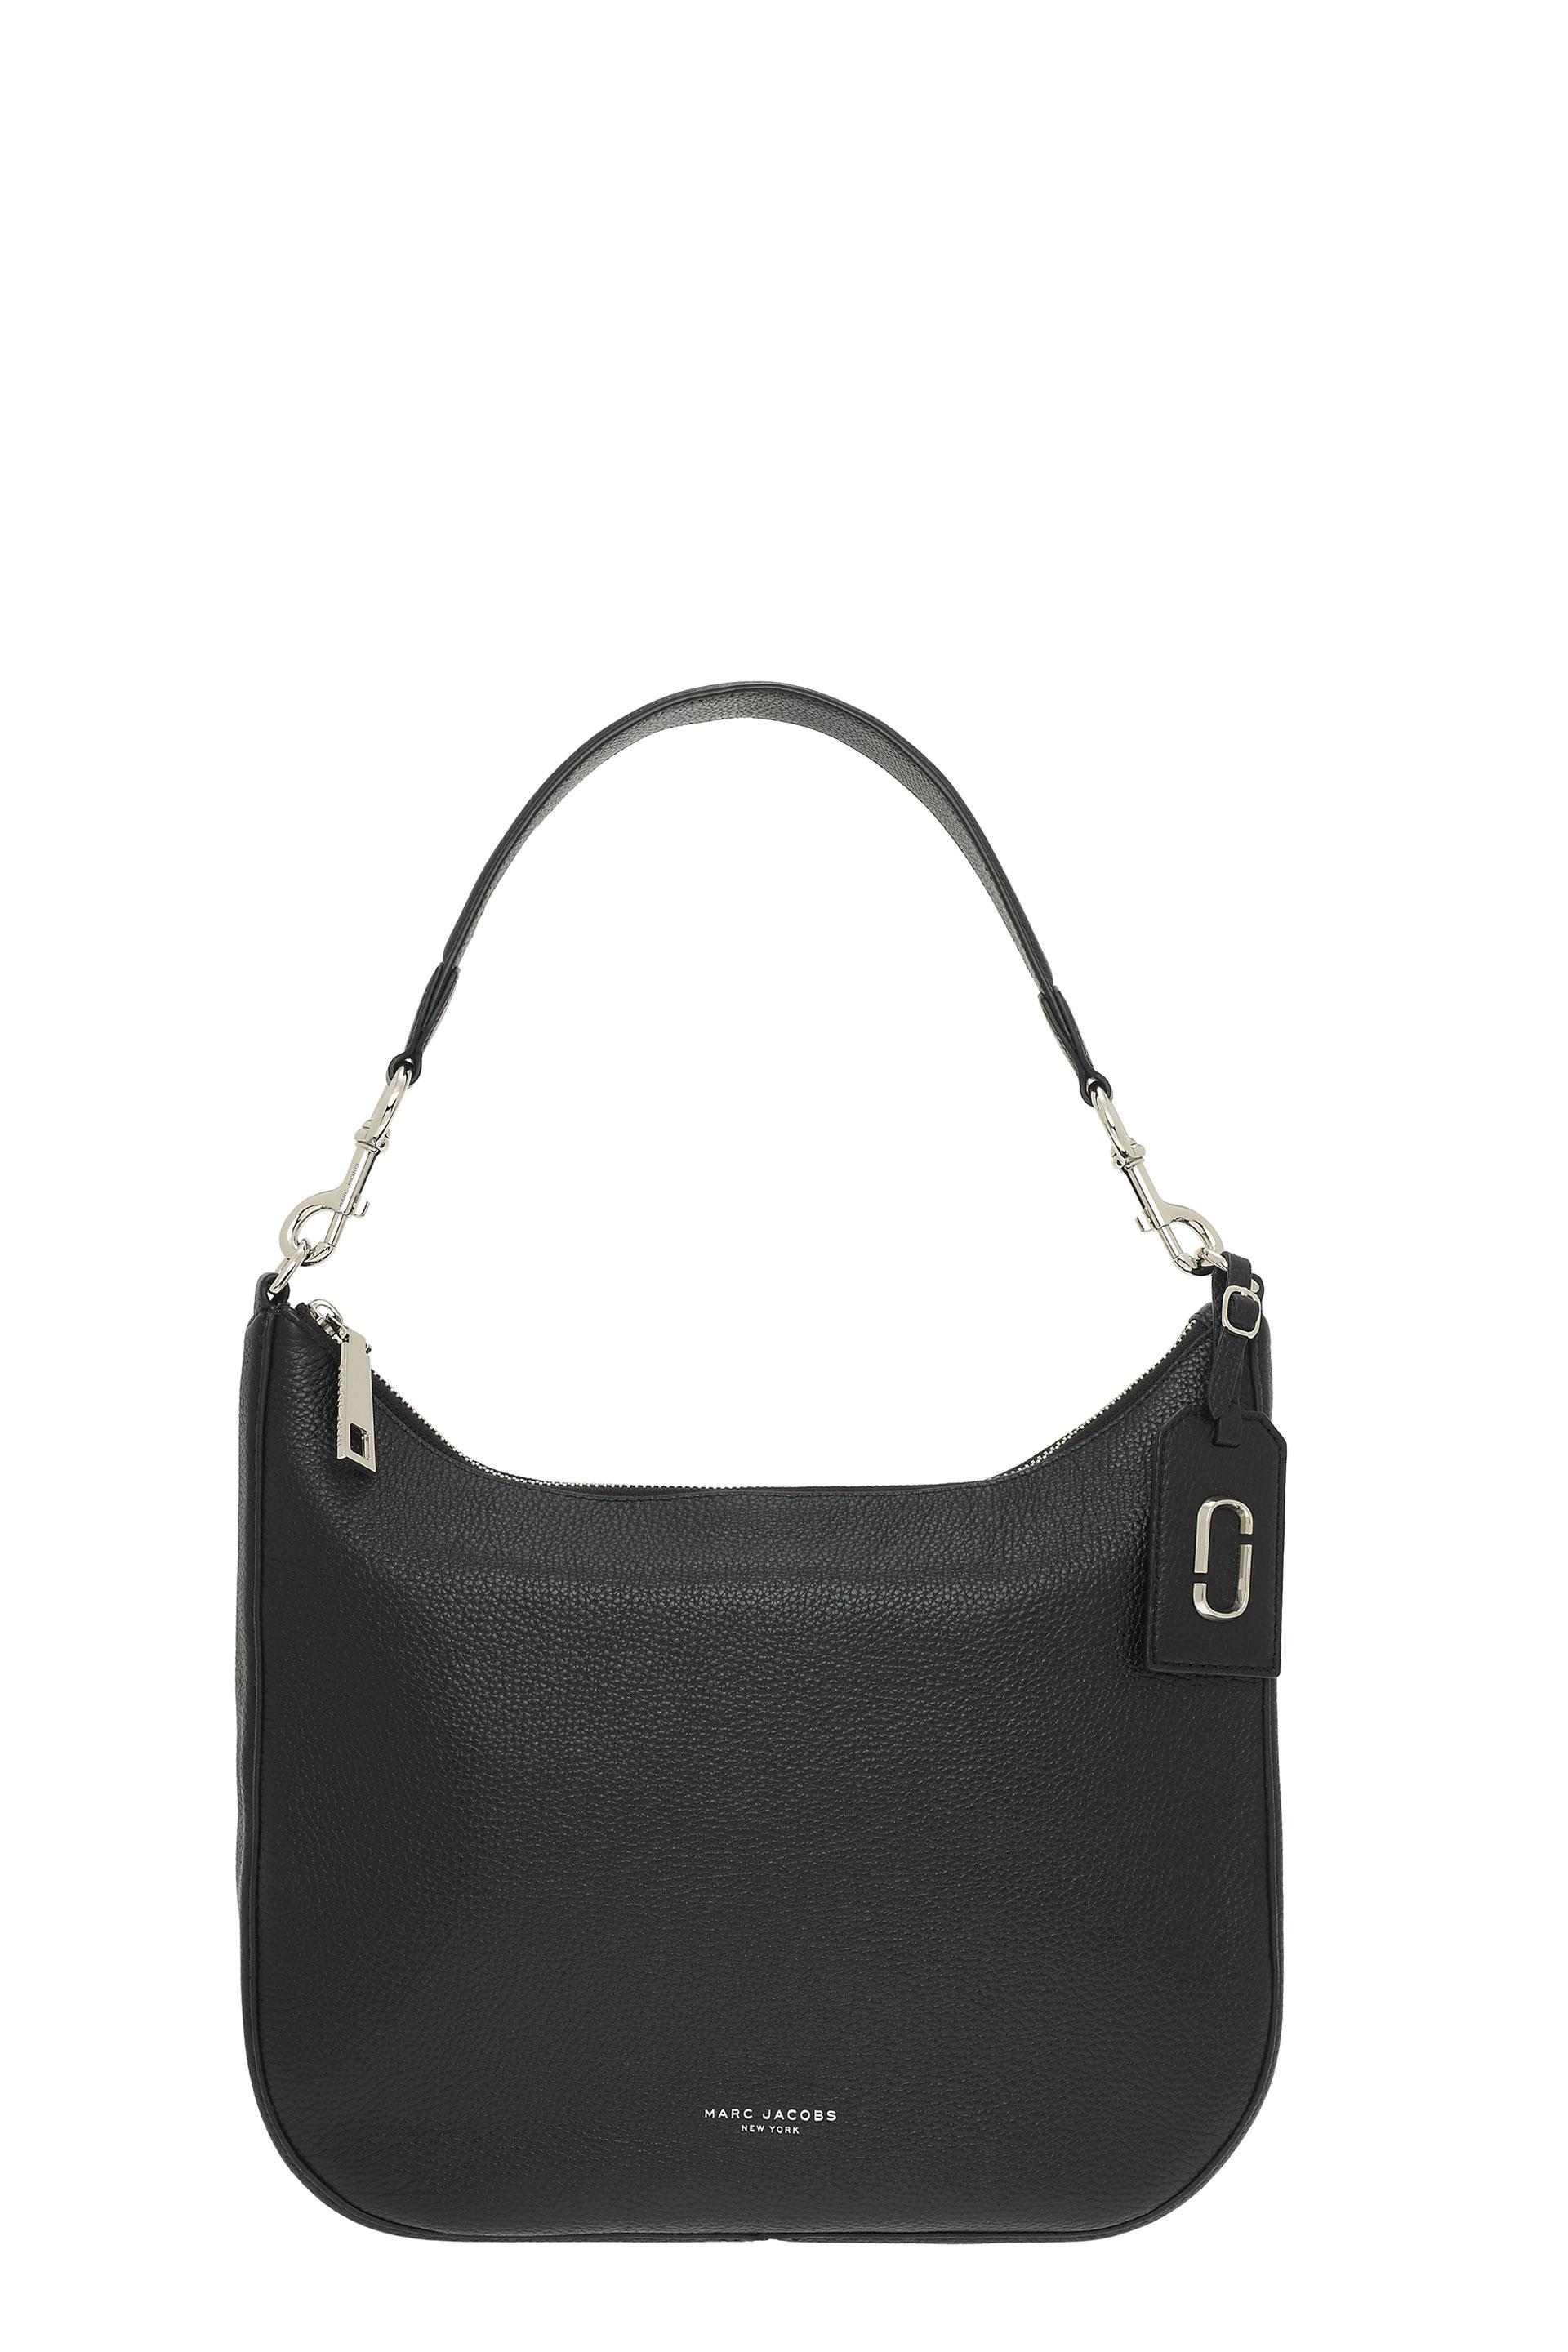 MARC JACOBS 'PIKE PLACE' LEATHER HOBO (NORDSTROM EXCLUSIVE), BLACK ...